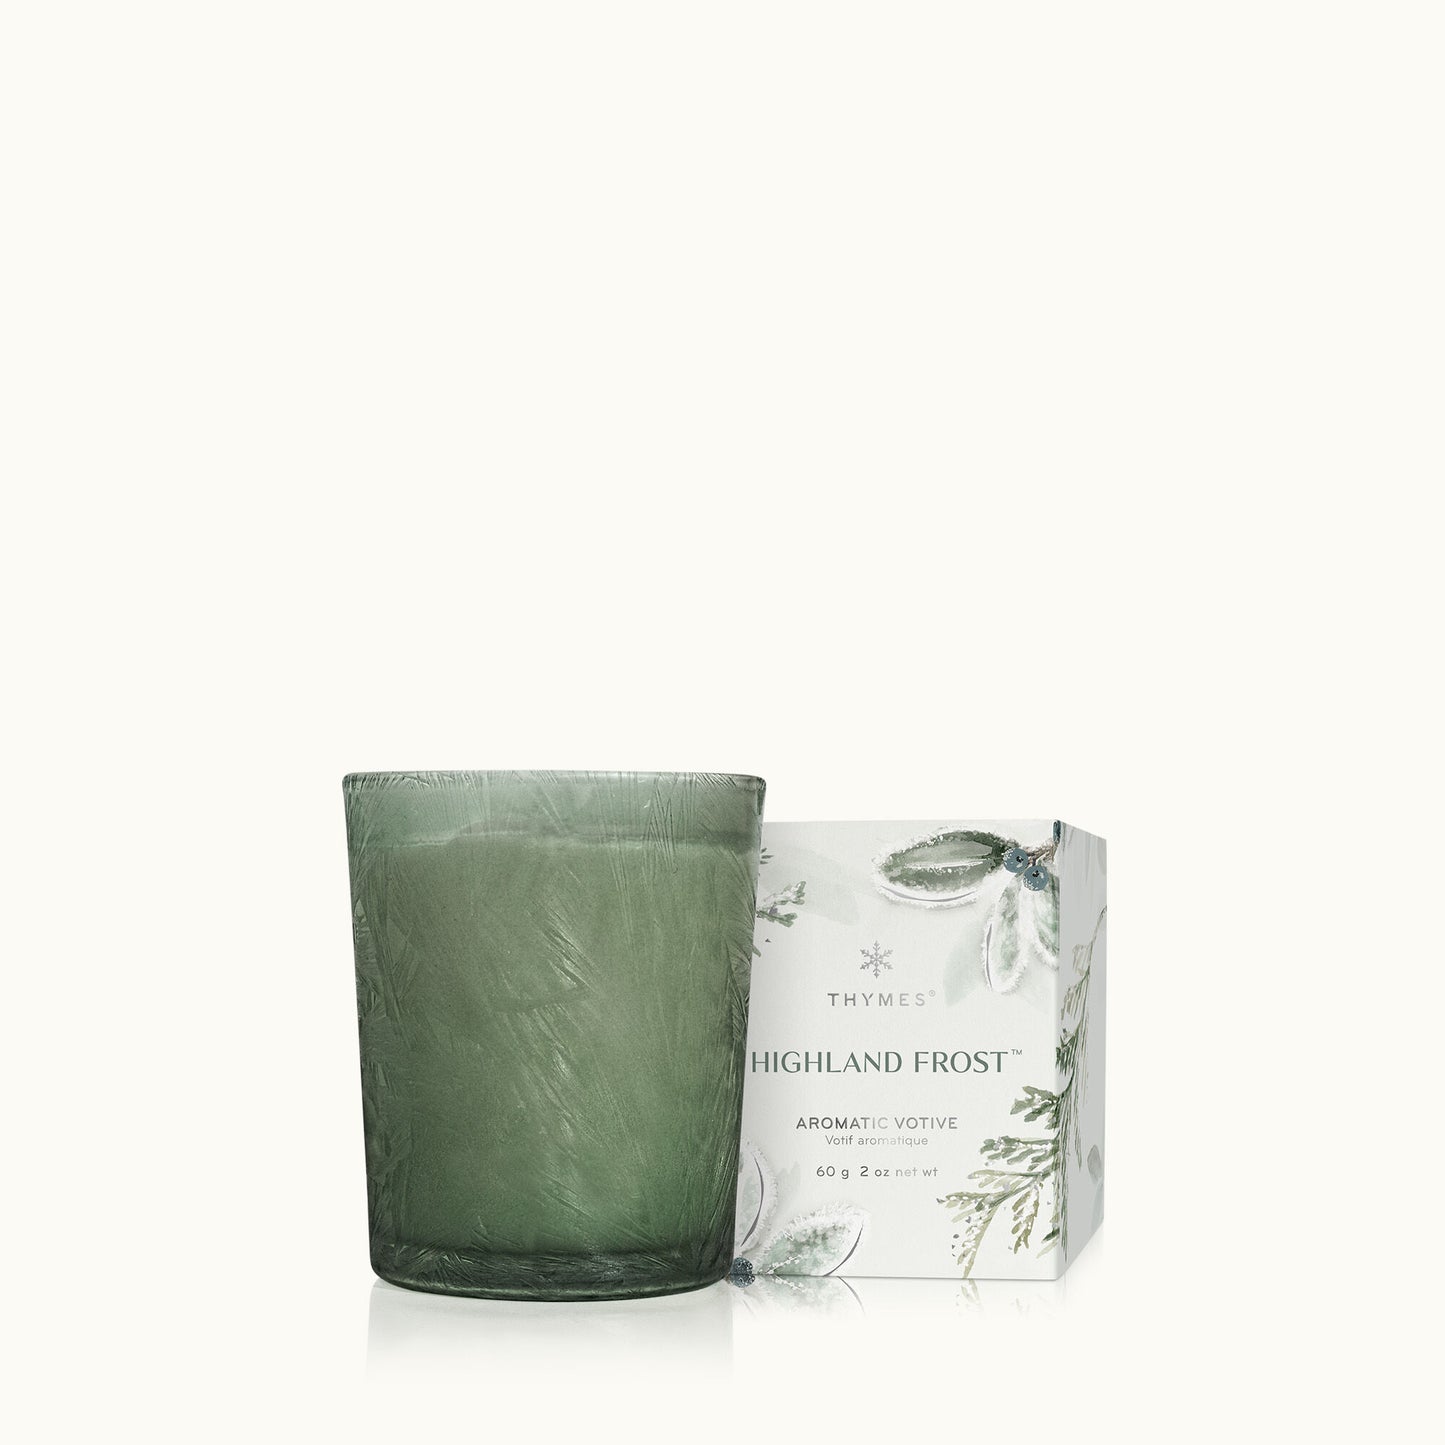 THYMES Highland Frost Votive Candle - 2 oz